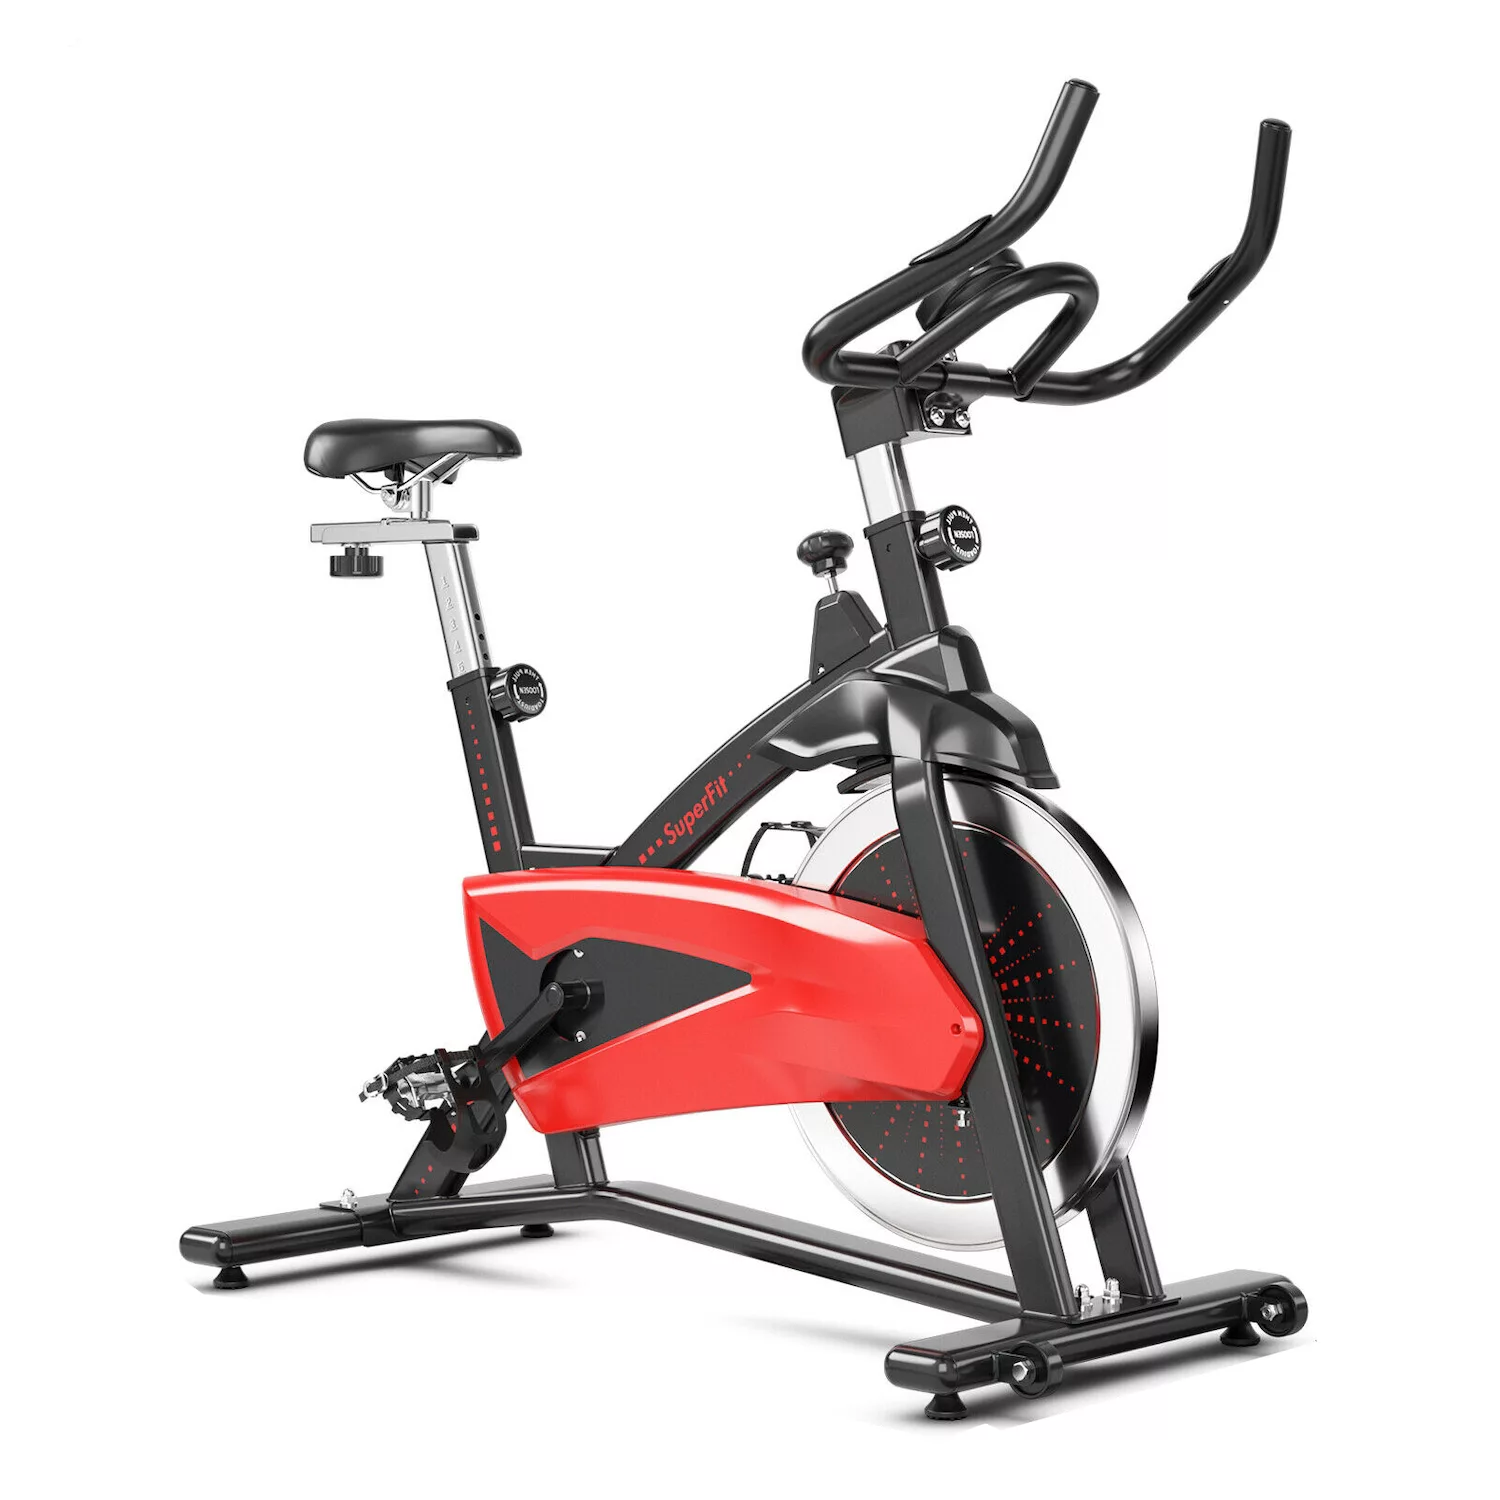 Review of Kohl’s Exercise Bikes